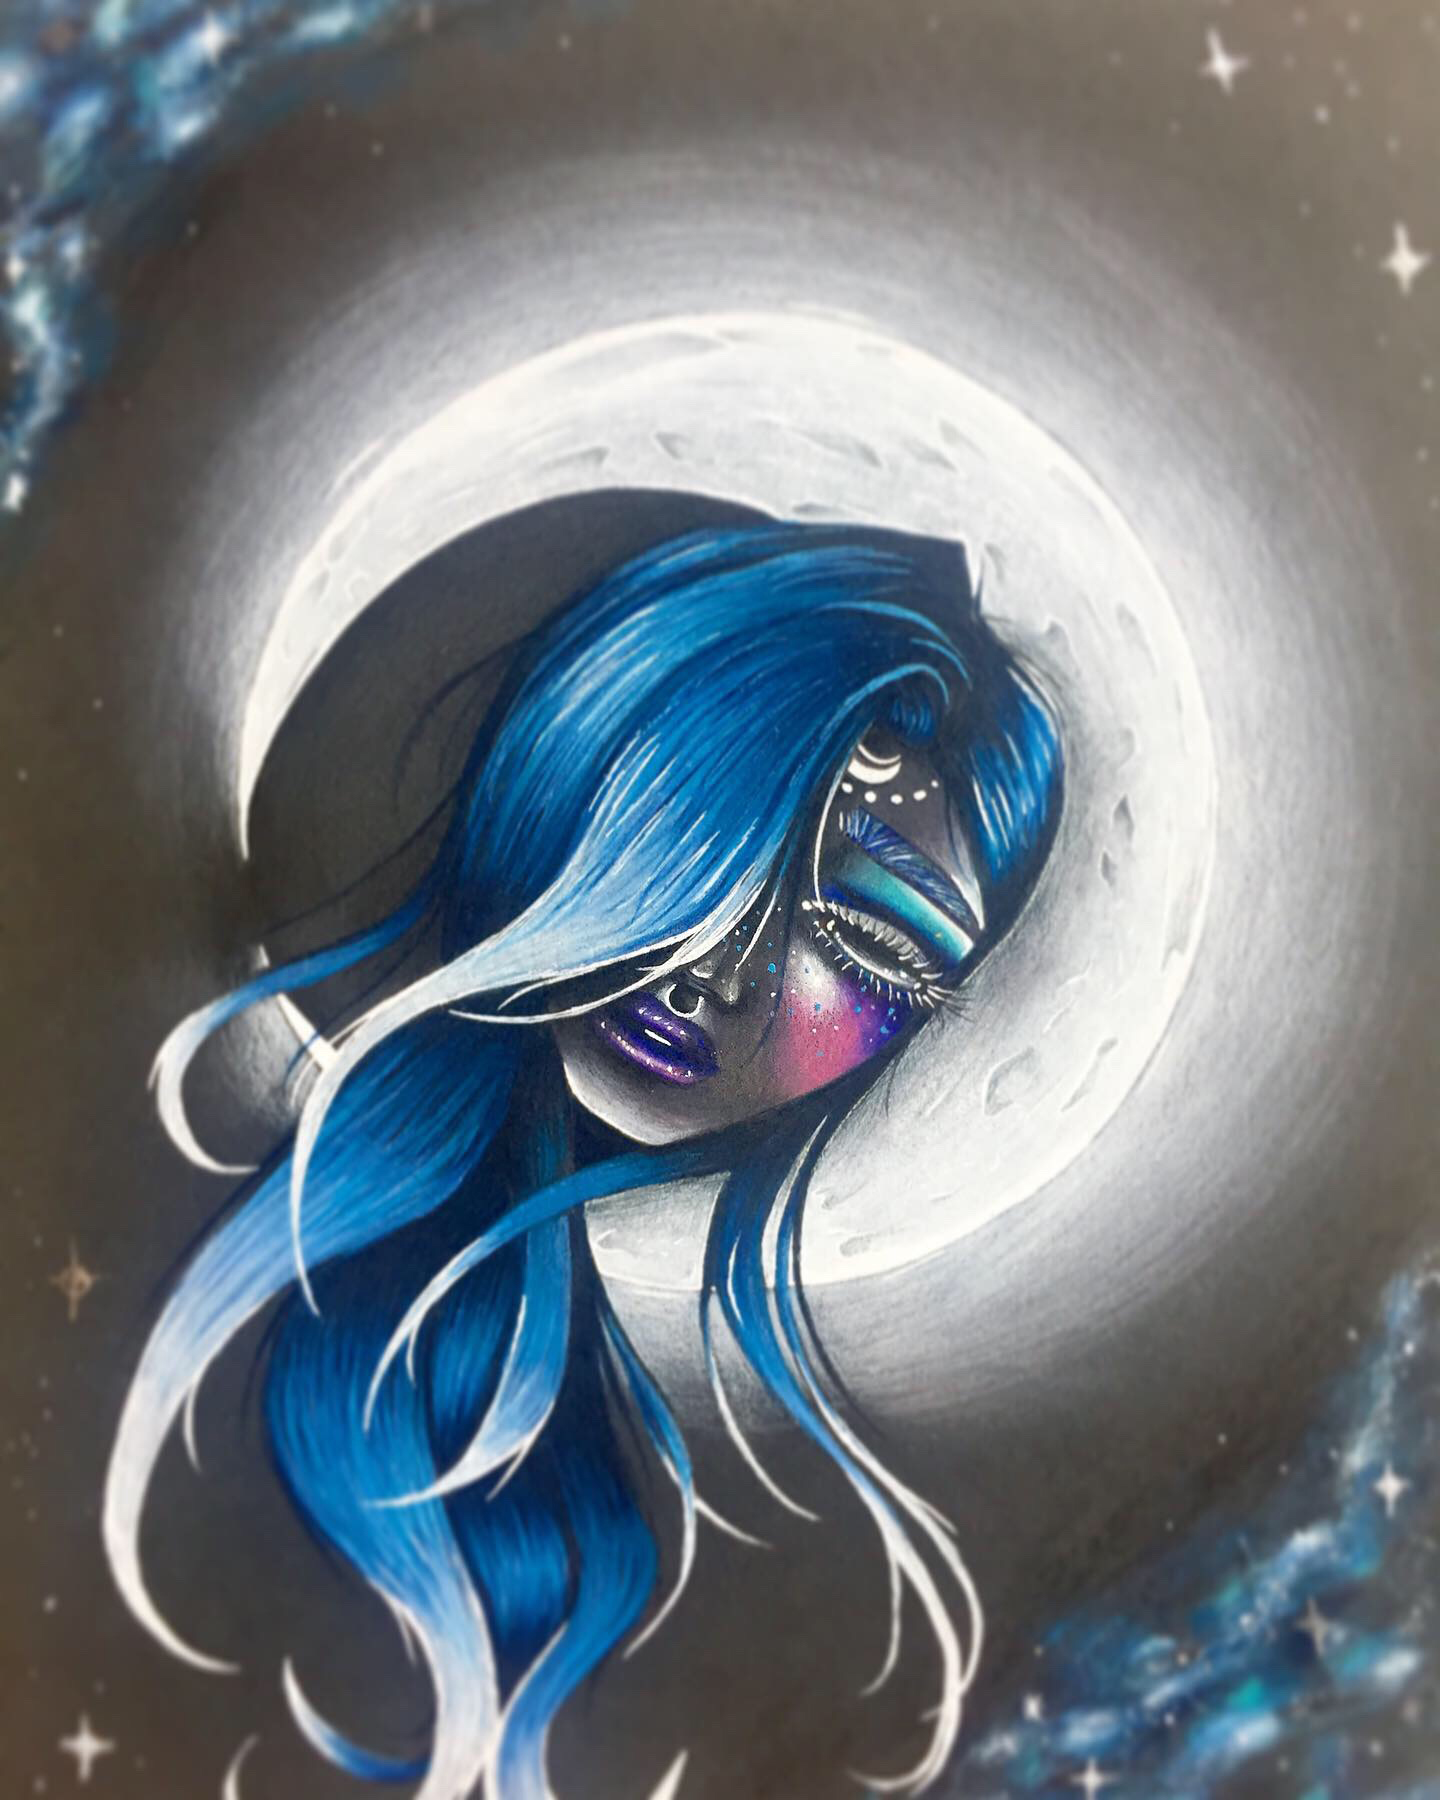 A drawing depicts a woman's disembodied head in front of a white full moon against a black sky. The woman's head is tilted approximately forty-five degrees clockwise and casts a shadow on the left side of the moon. Her face is predominantly dark gray. She is wearing a septum ring and has long, blue and white hair and purple lips. There is an arc of white dots on her forehead. Smaller, blue dots fleck her left cheek, which is colored pink and purple. The right side of her face is obscured by her hair. There is a blue and white galaxy-like pattern in the top-left and bottom-right corners of the image, and a few white stars in the other corners of the image.